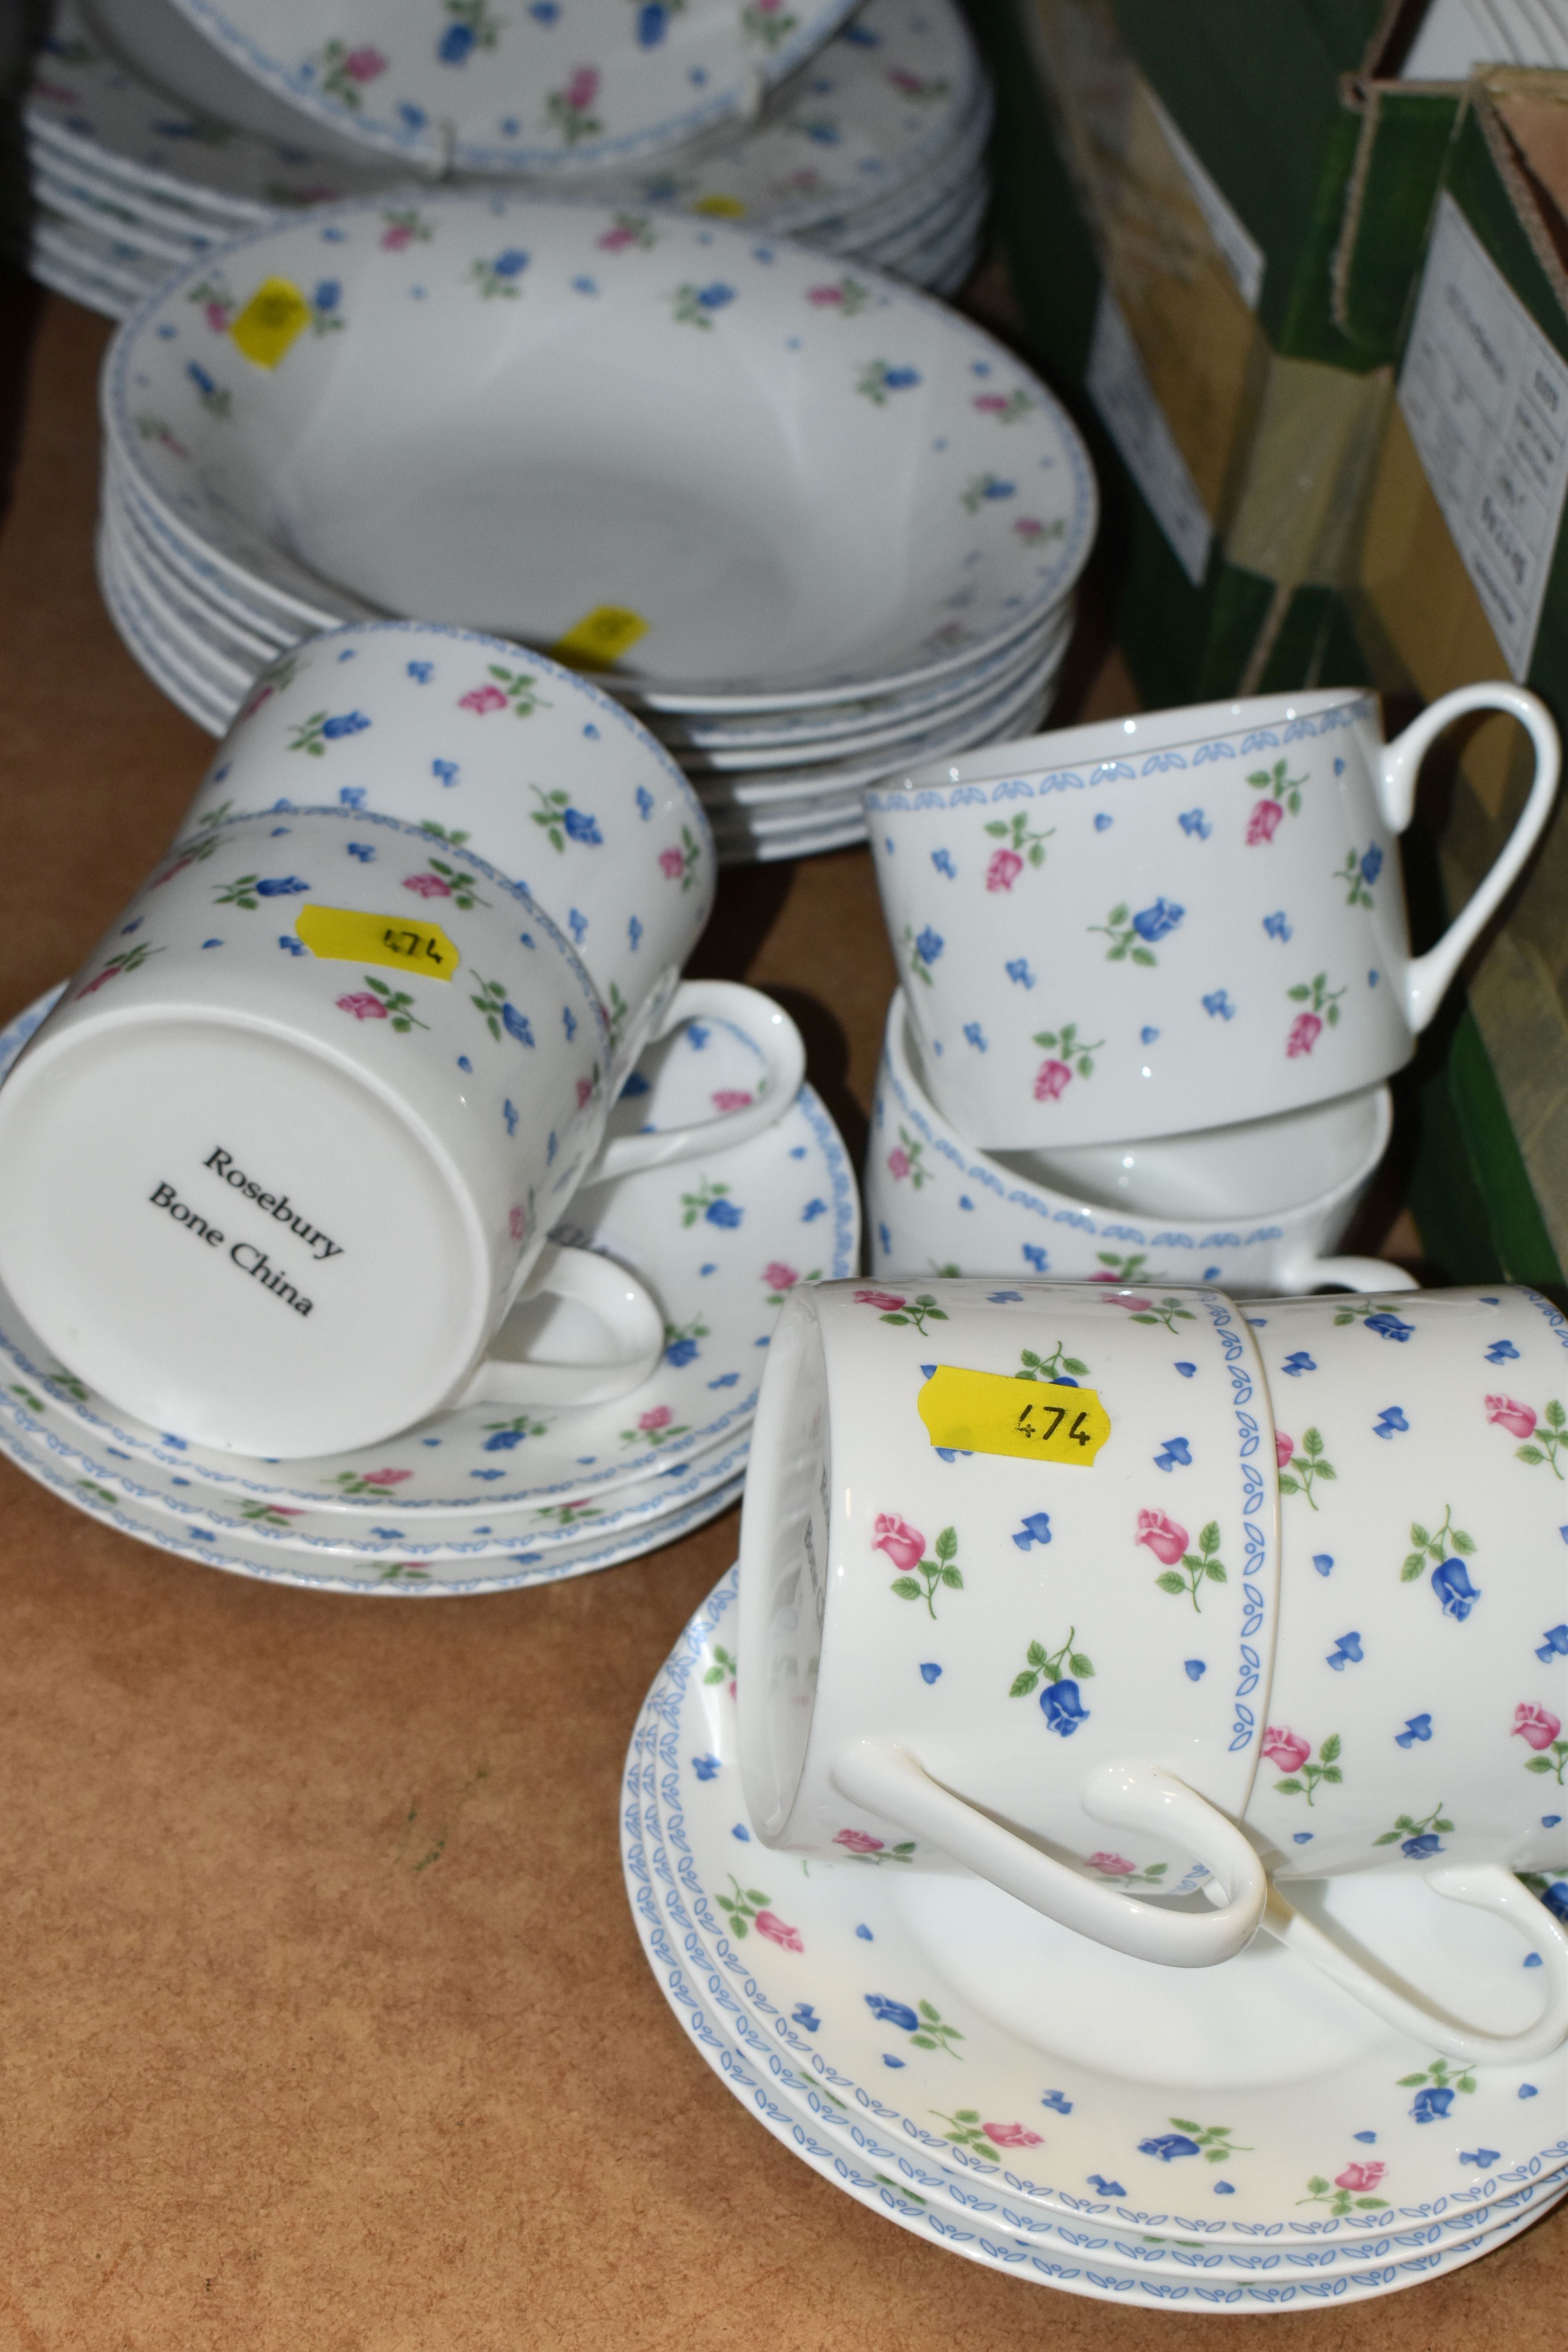 TWO BOXES AND LOOSE ROYAL DOULTON 'TUMBLING LEAVES' PATTERN DINNER SET, to include dinner plates, - Image 2 of 5